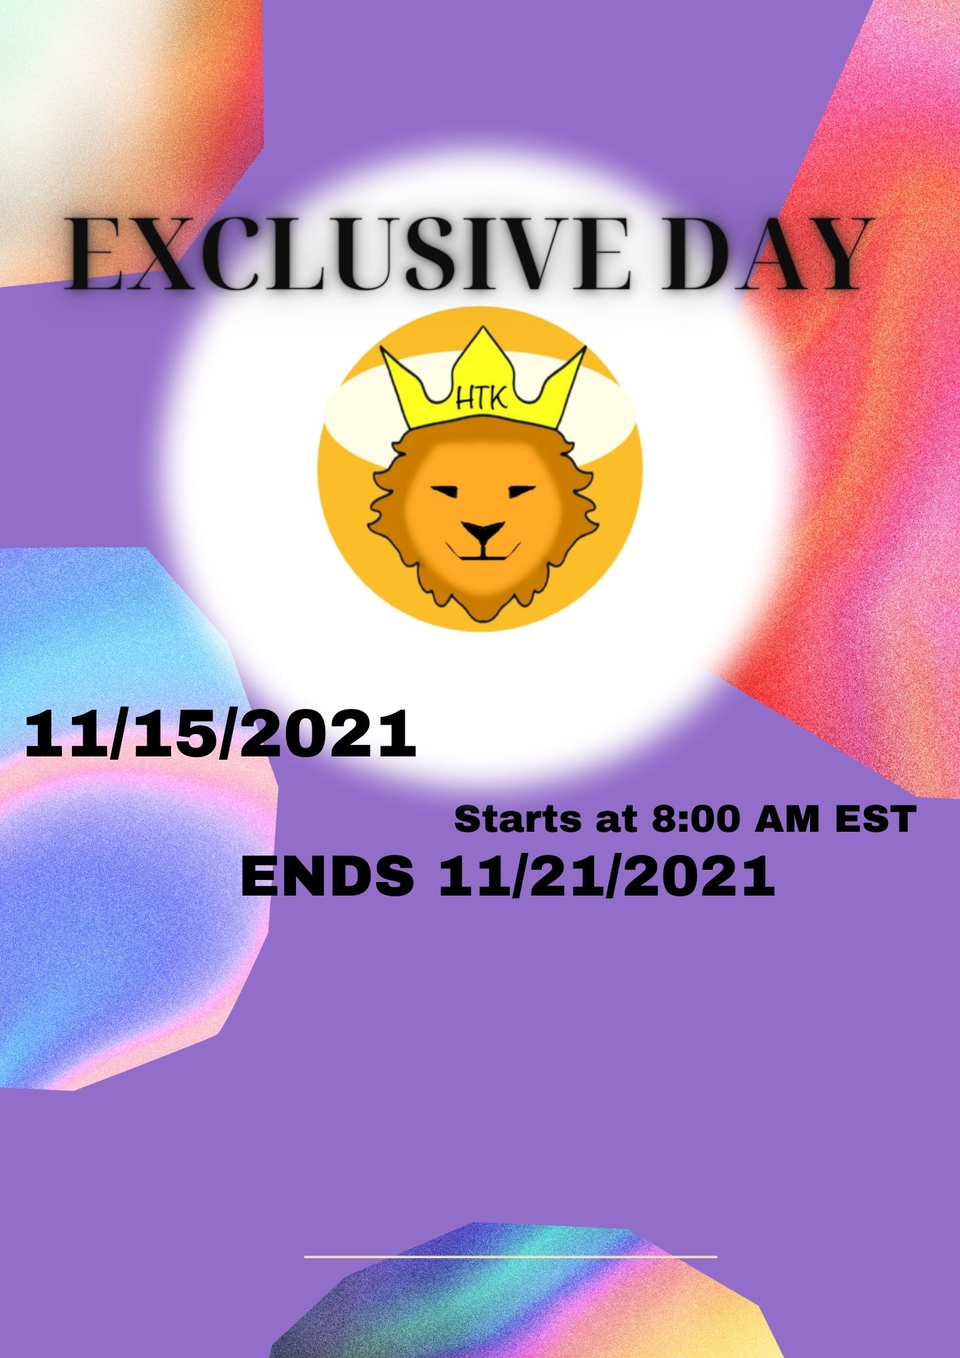 EXCLUSIVE DAY IS HERE!